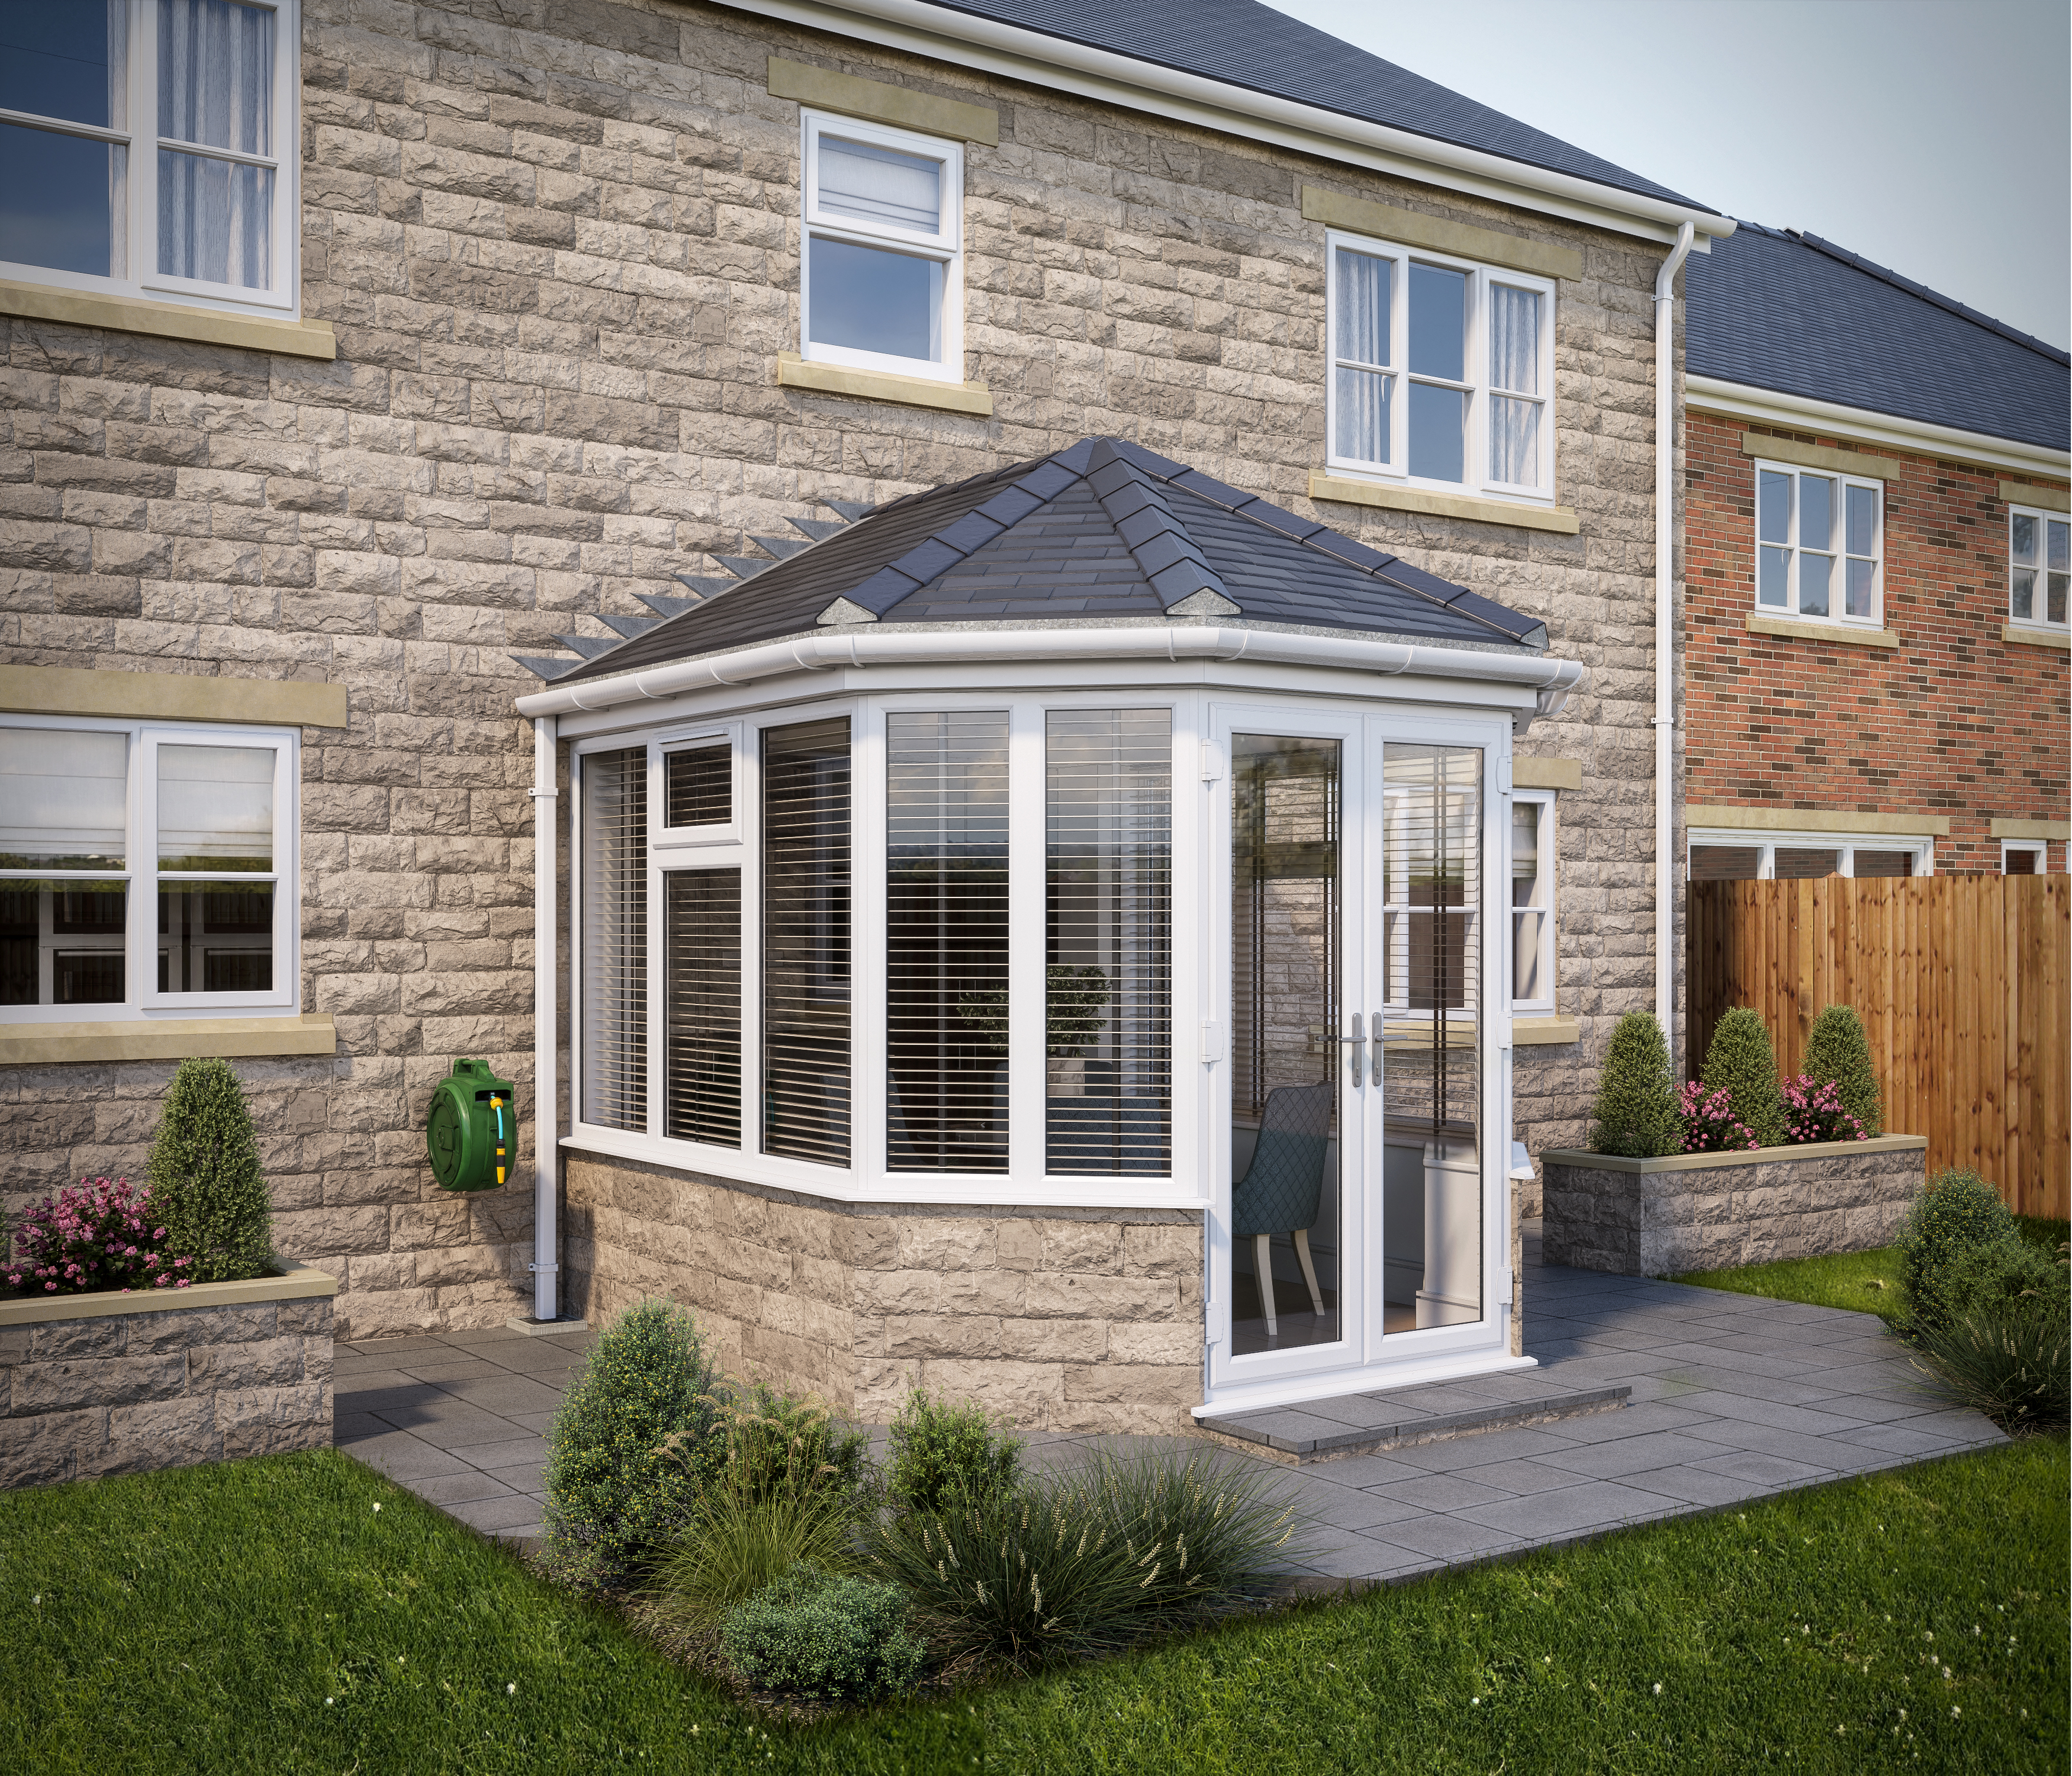 Image of SOLid Roof Victorian Conservatory White Frames Dwarf Wall with Titanium Grey Tiles - 10 x 10ft